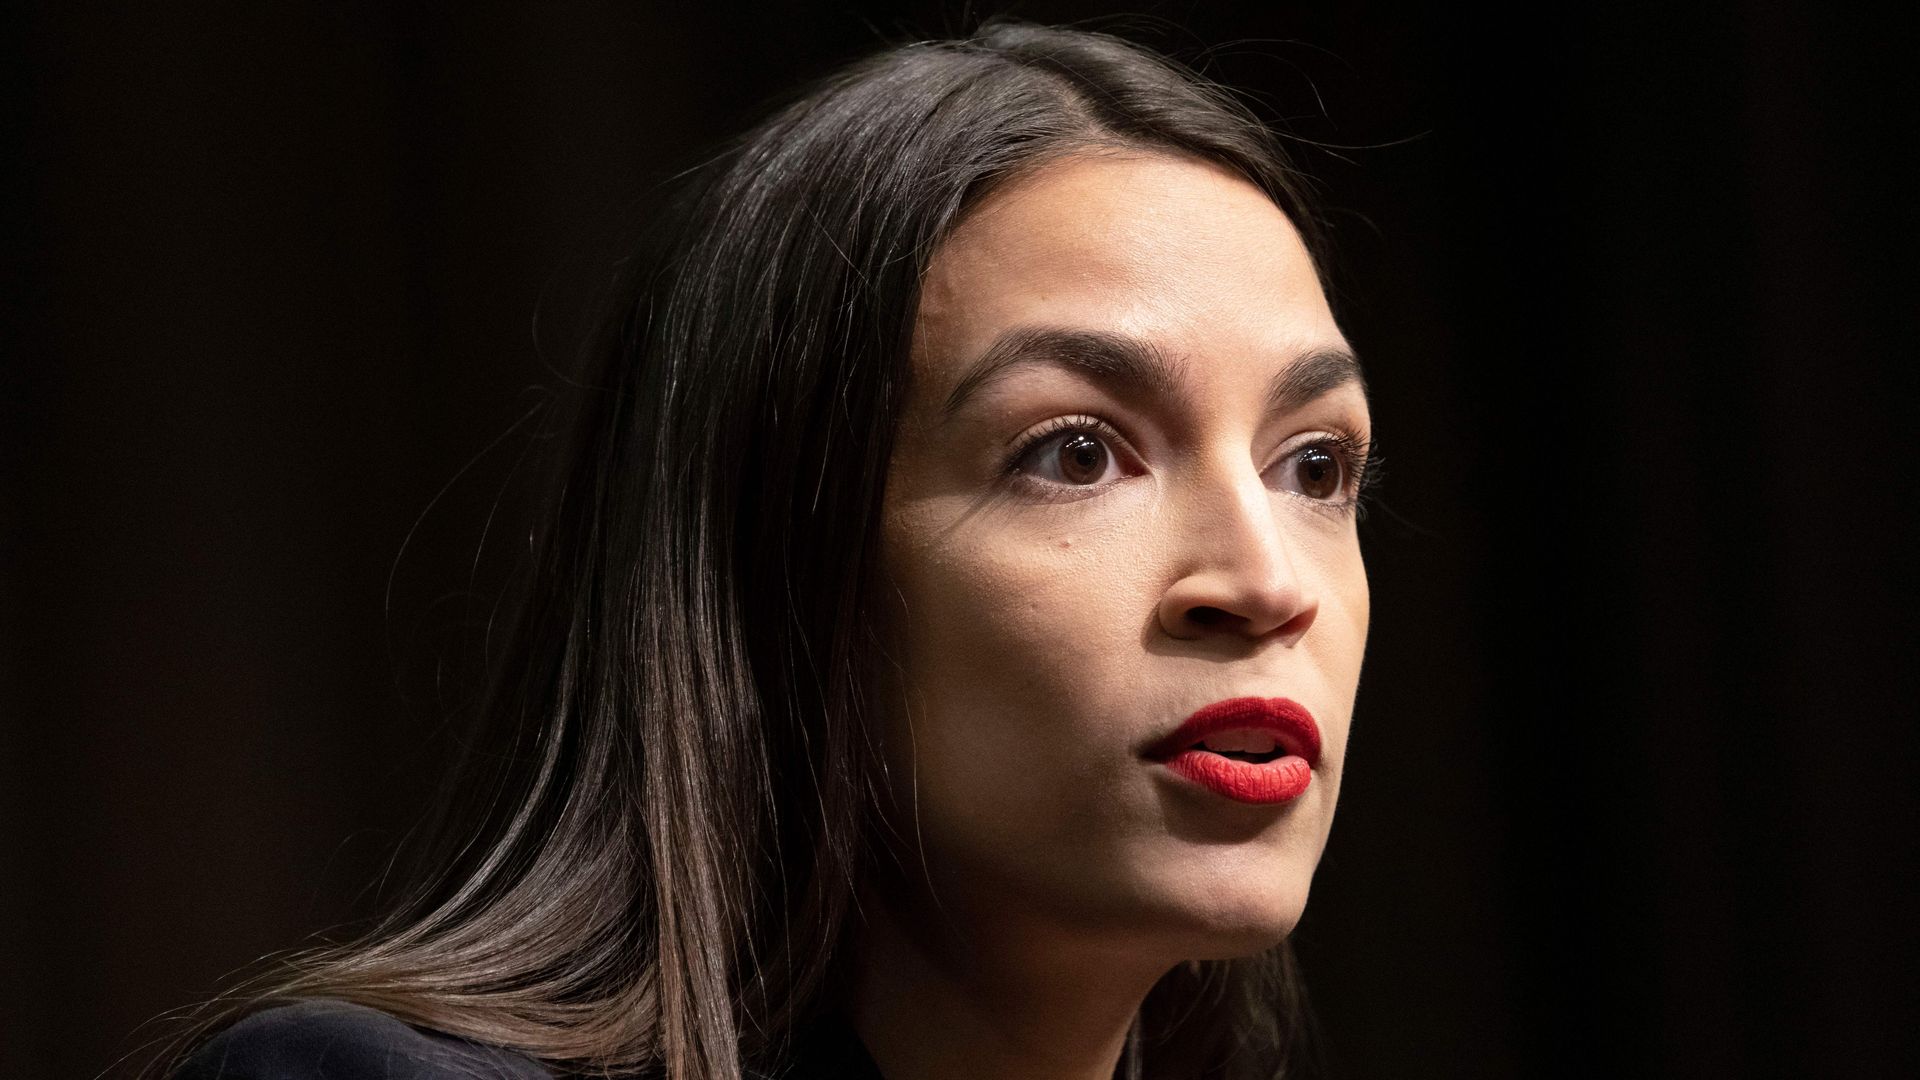 Representative Alexandria Ocasio-Cortez speaks during a gathering of the National Action Network April 5, 2019 in New York.